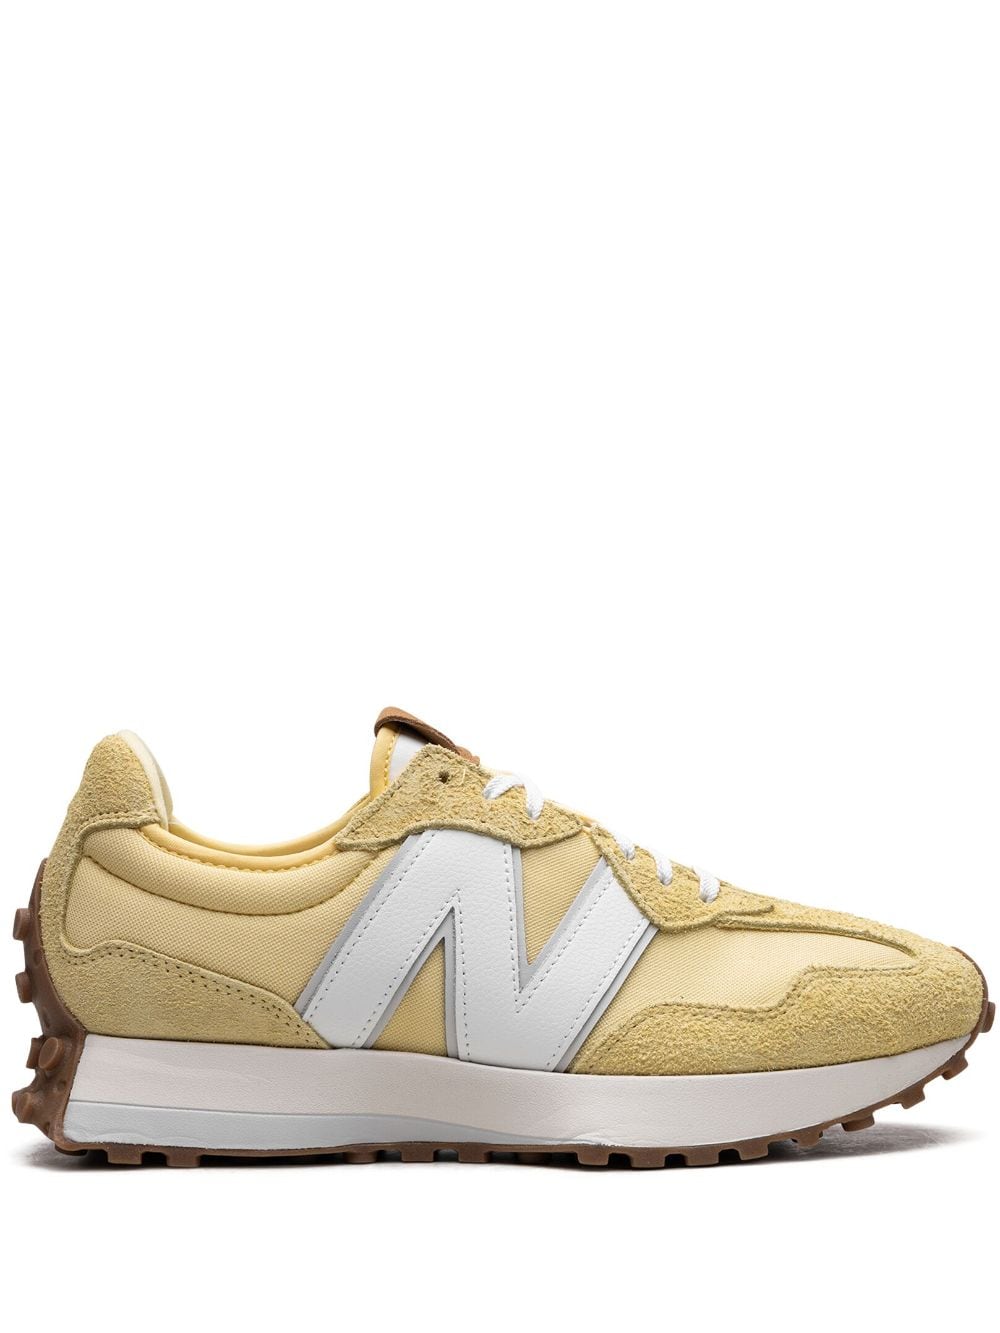 New Balance 327 "Canary" sneakers - Yellow